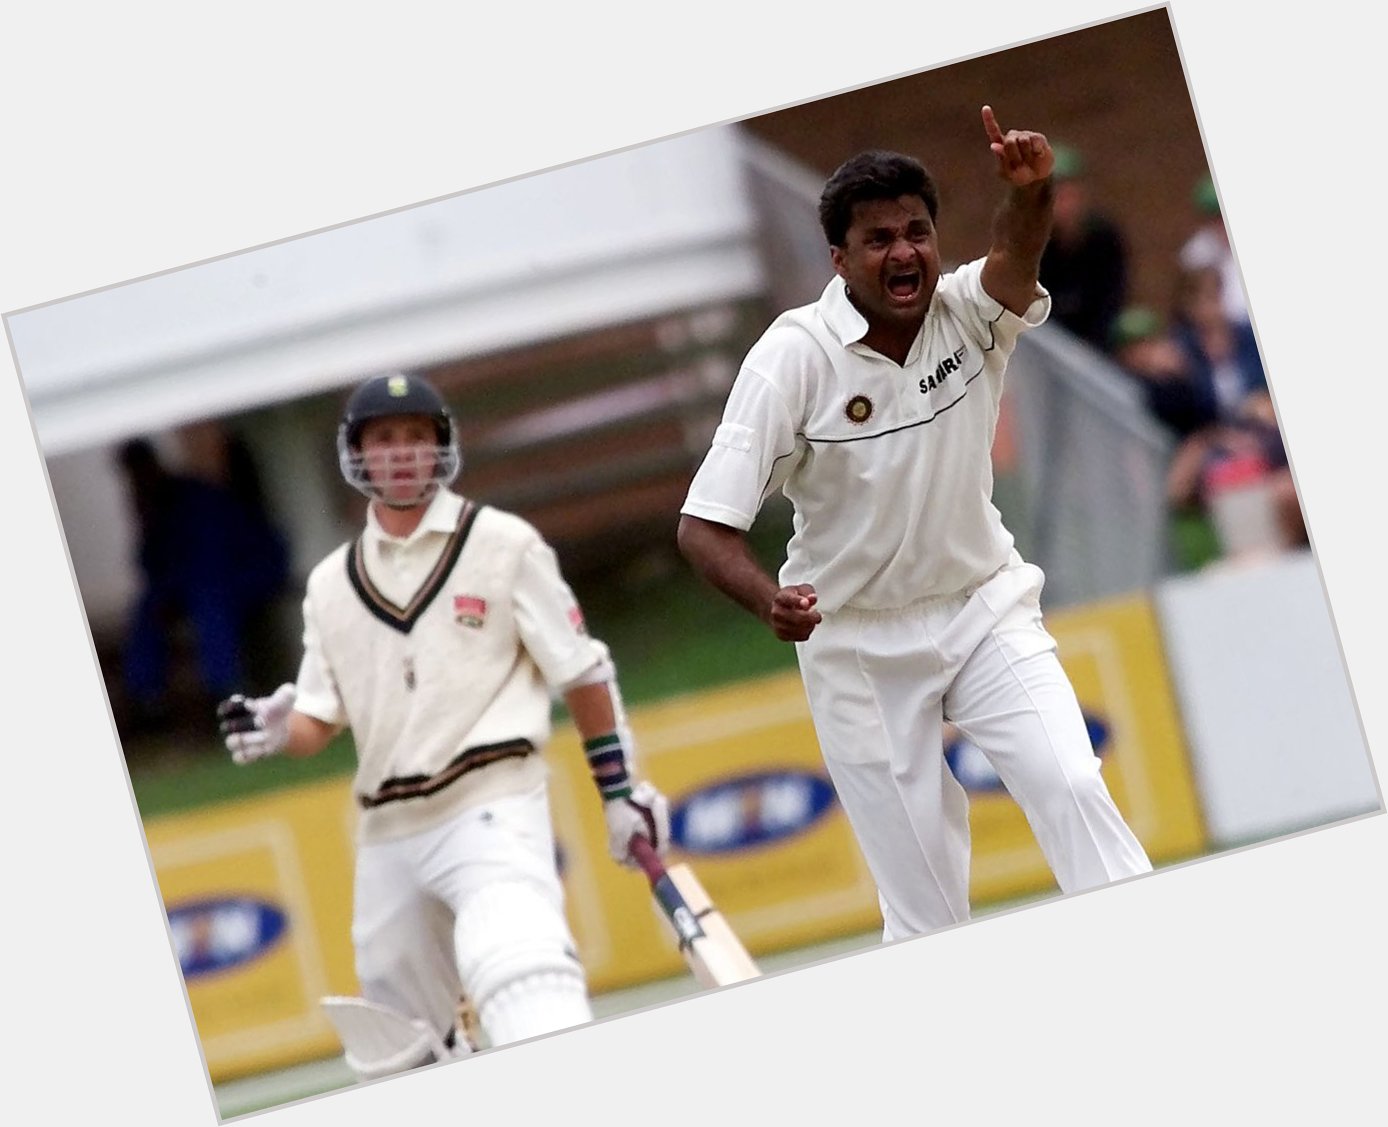 Happy birthday to India\s best fast bowler of the 90s: Javagal Srinath! 